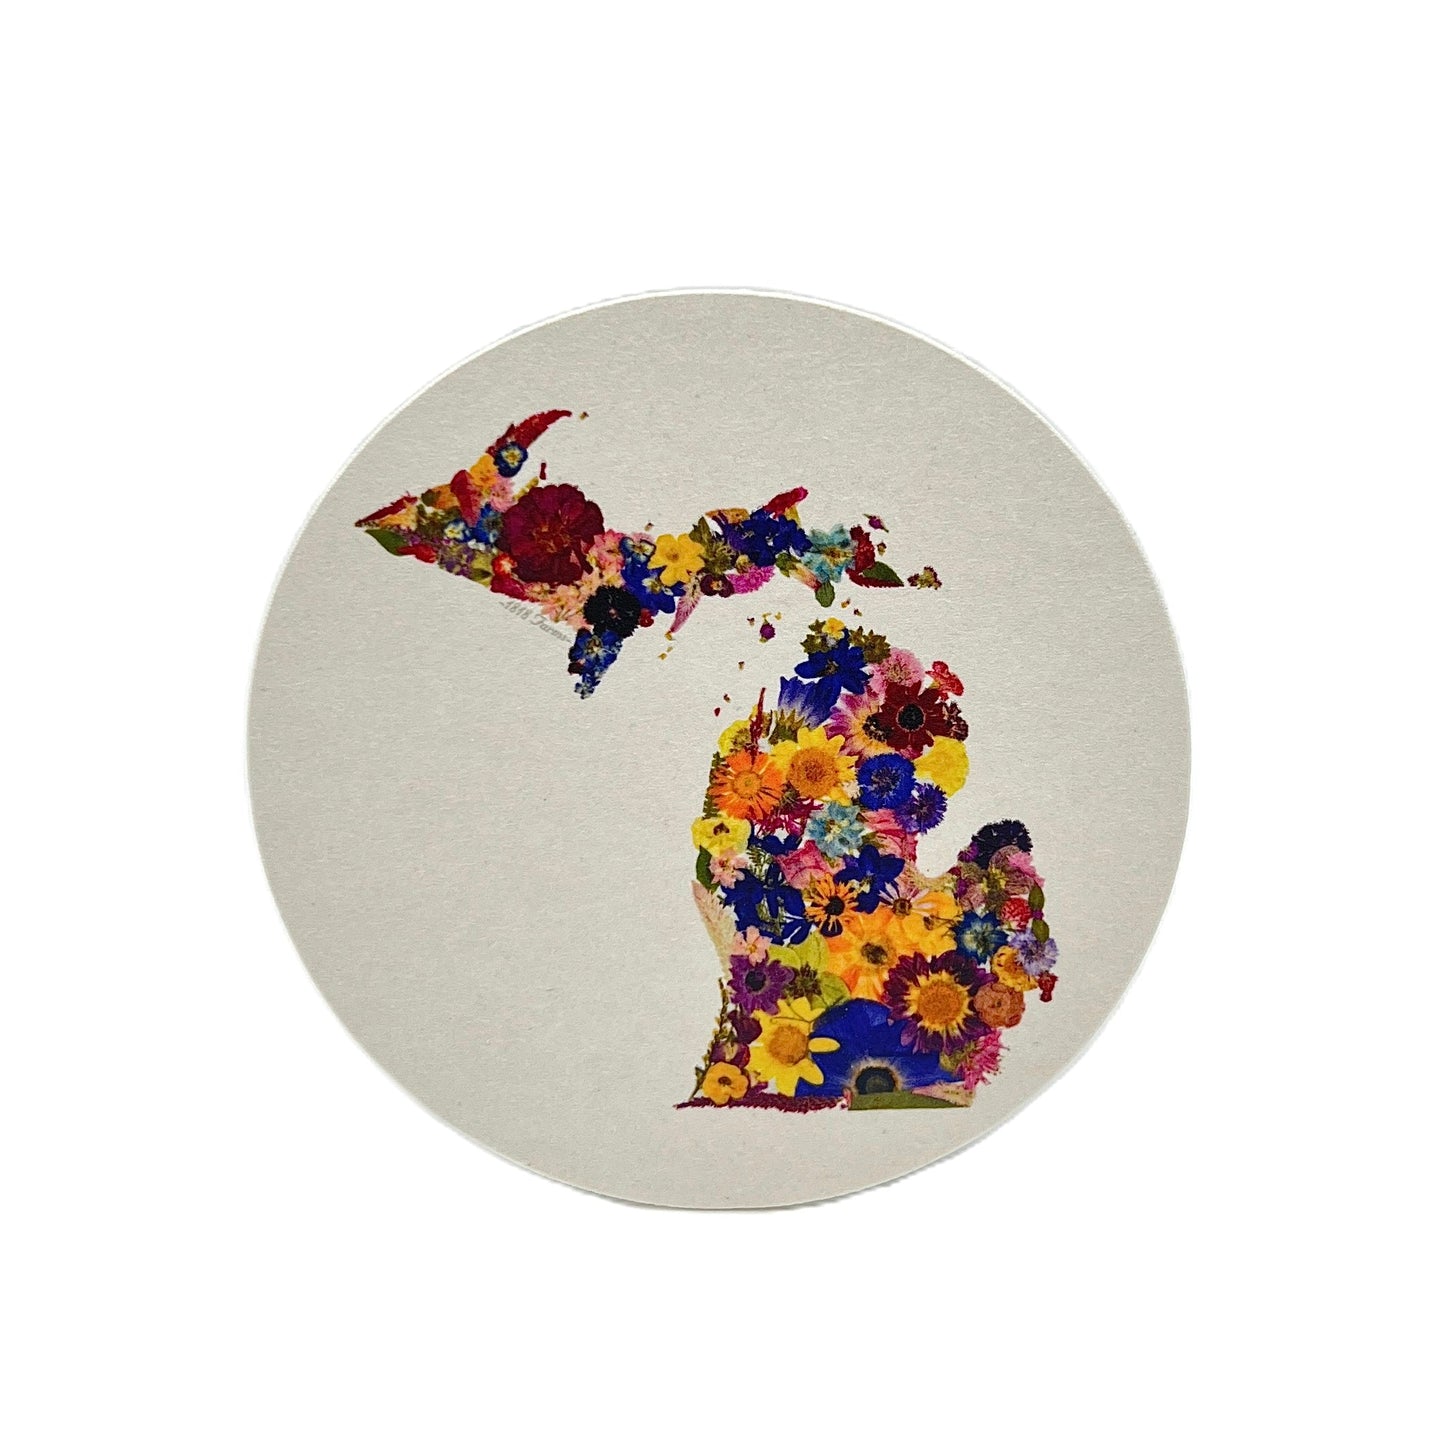 State Themed Drink Coasters (Set of 6)  - "Where I Bloom" Collection Coaster 1818 Farms Michigan  